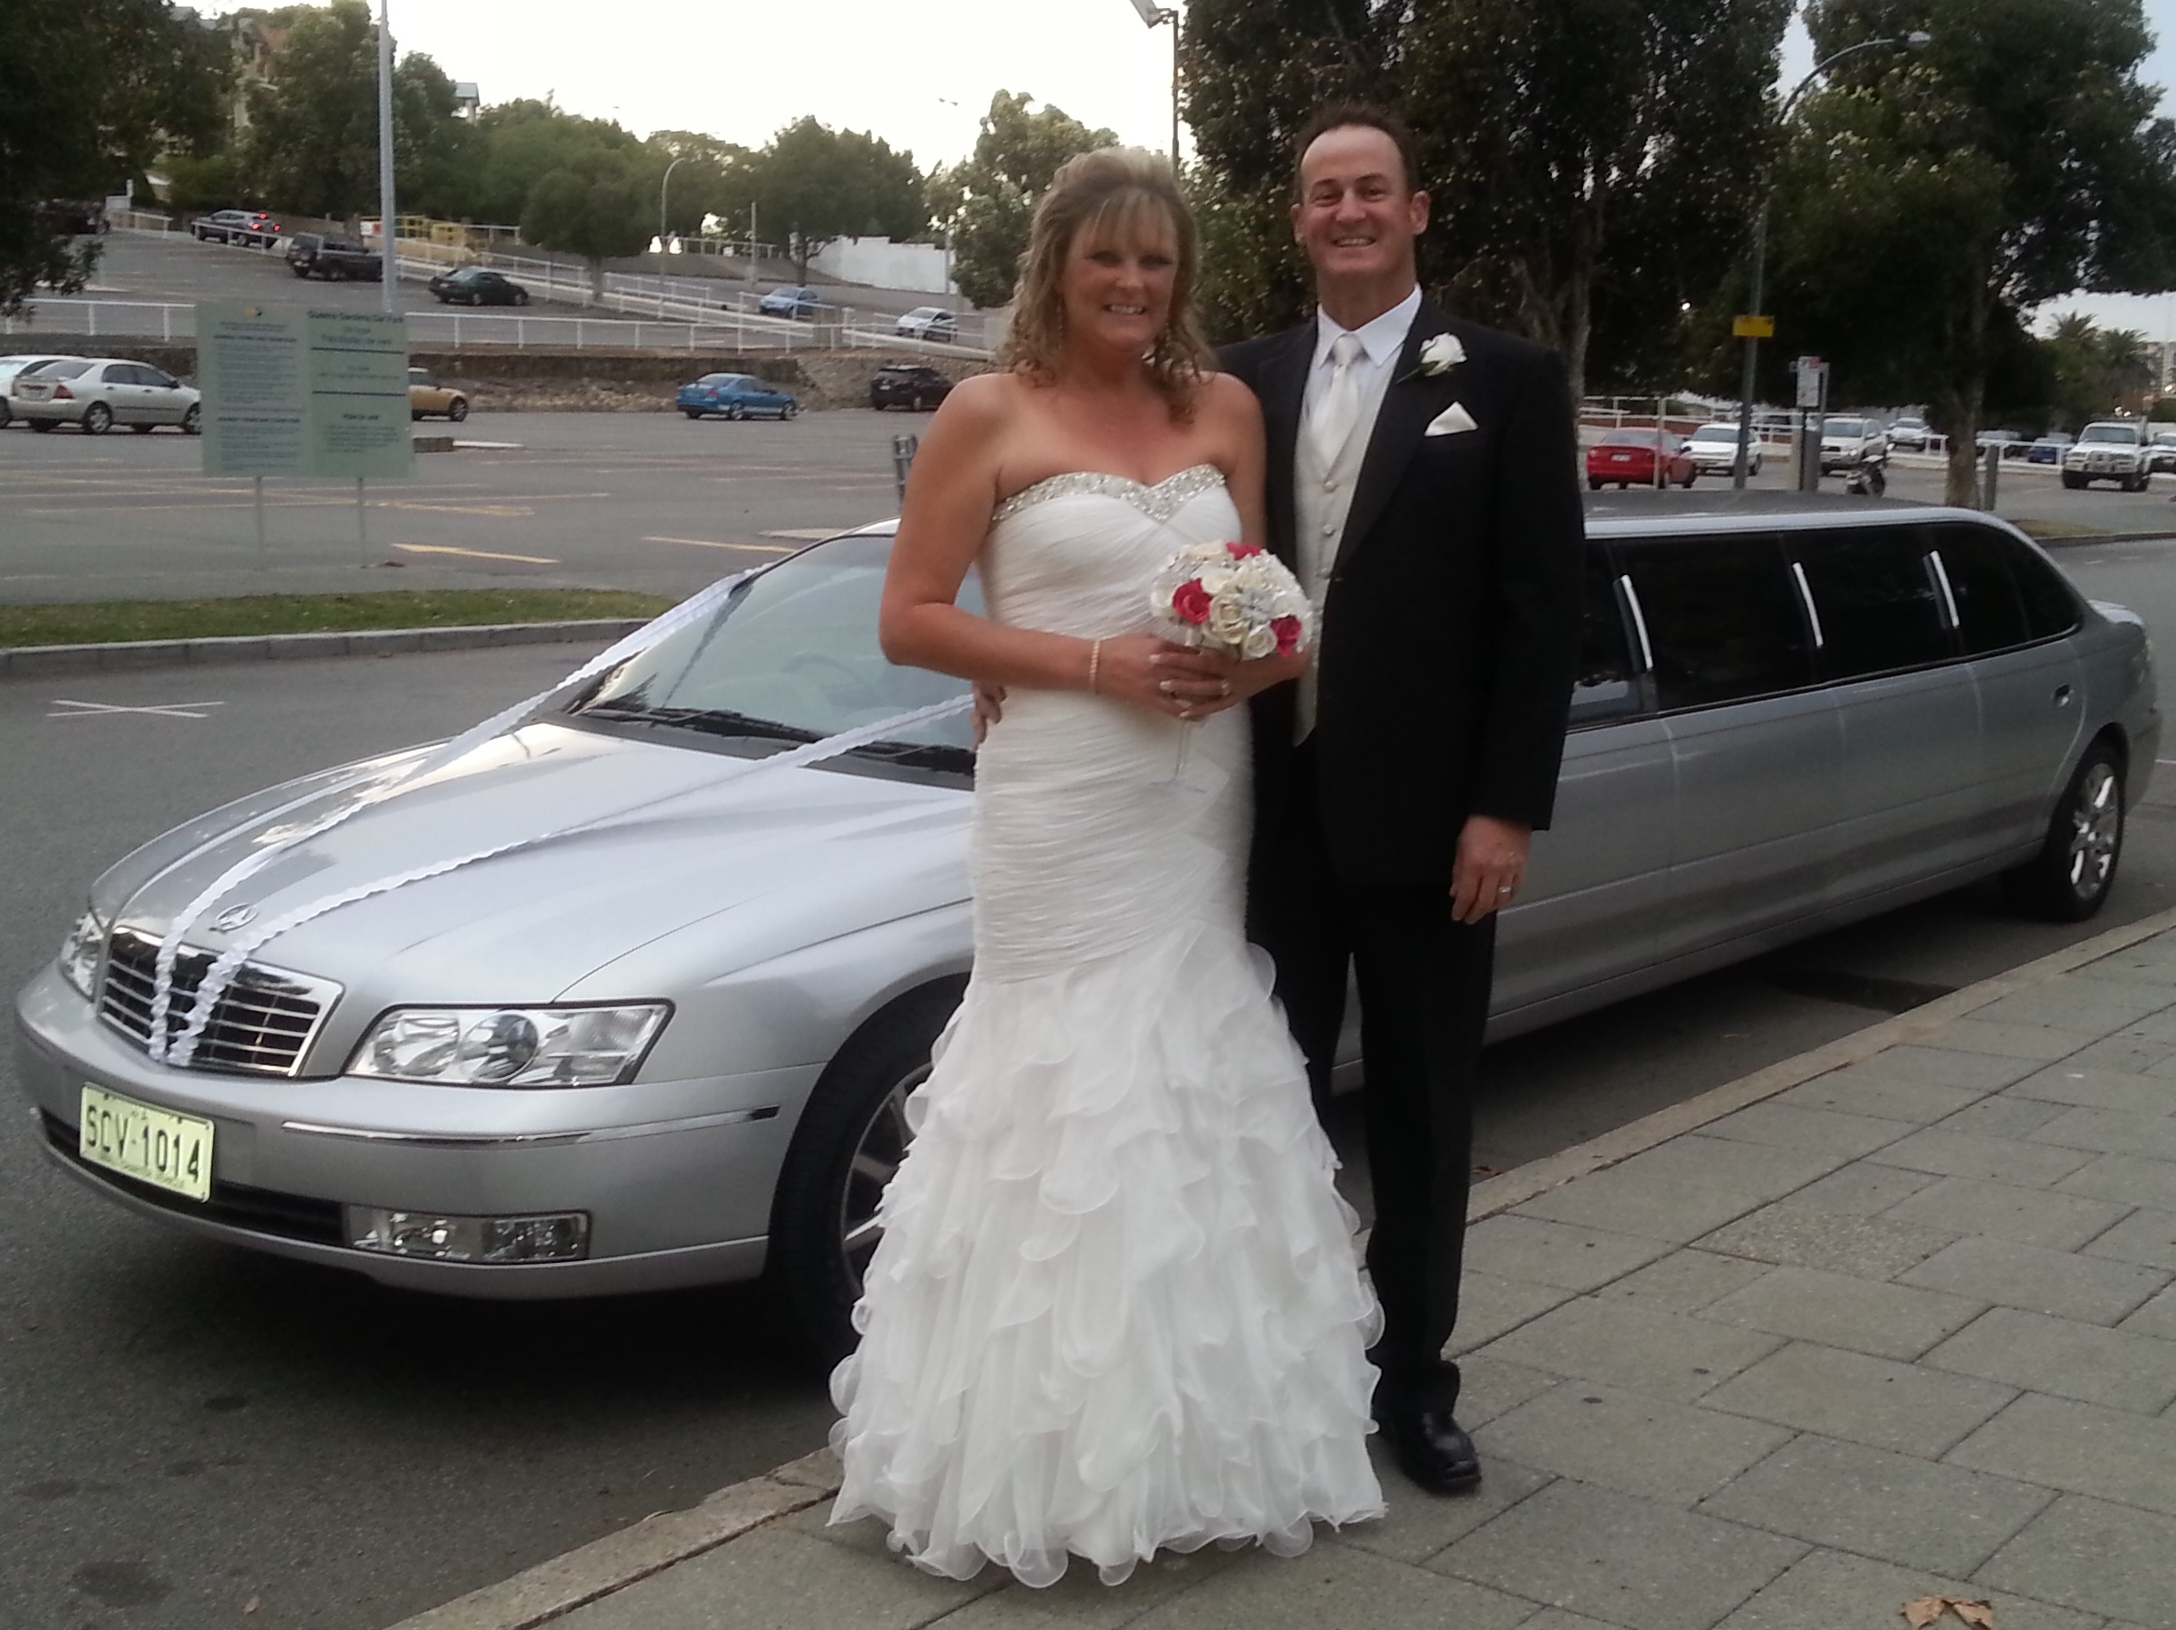 Great weather for a wedding day and Wedding Limousines Perth is proud to have been a small part of the celebrations